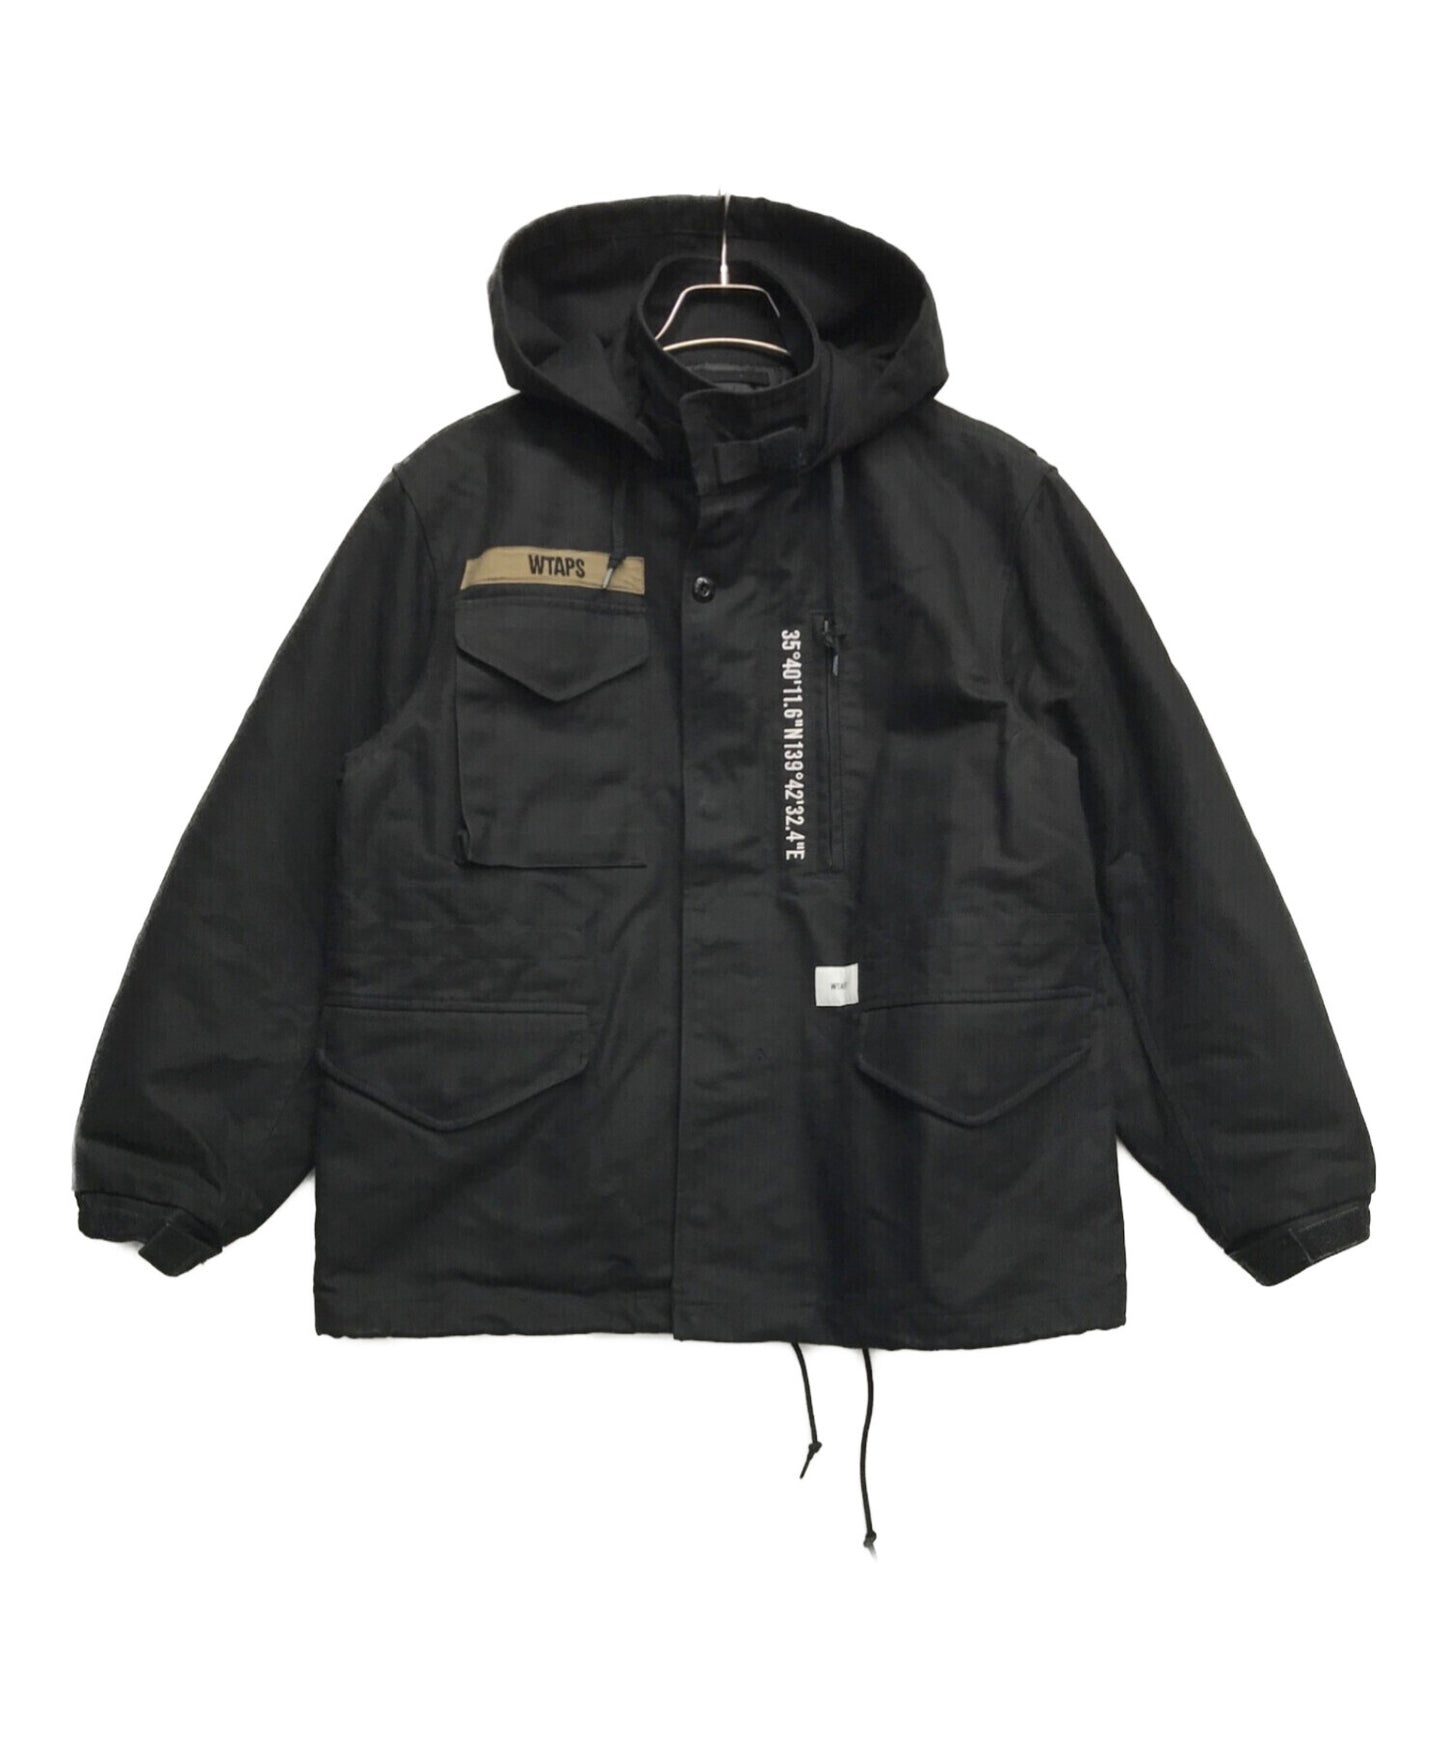 WTAPS Double S.F.M. Cotton Twill Jacket M-65 202WVDT-JKM01